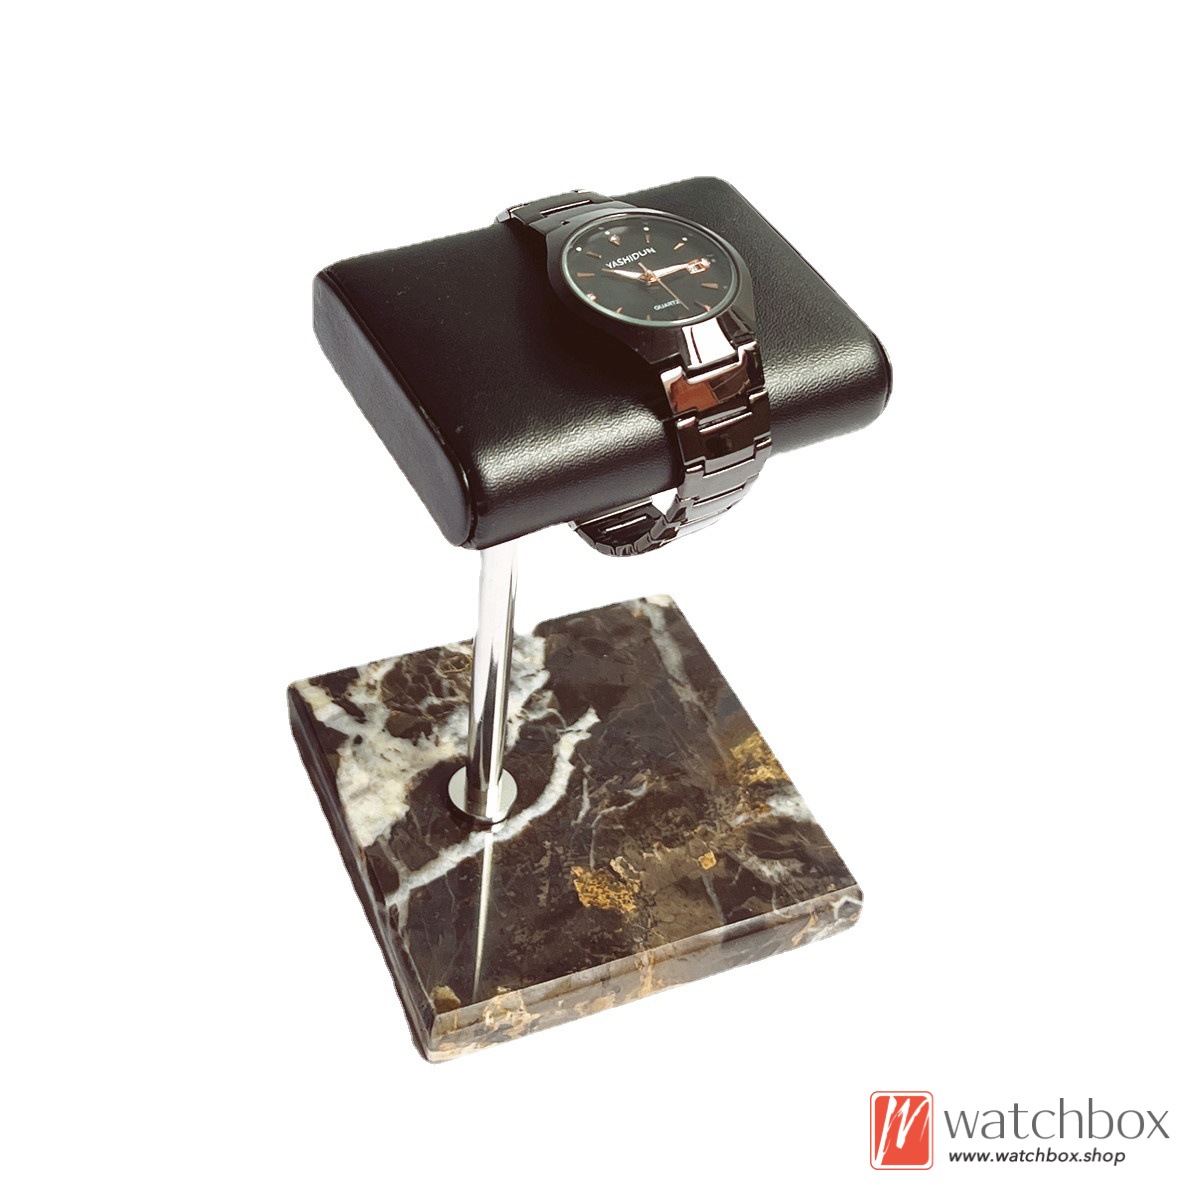 The Marble Base PU Leather Watch Bracelet Jewelry Case Holder Storage Counter Display Stand